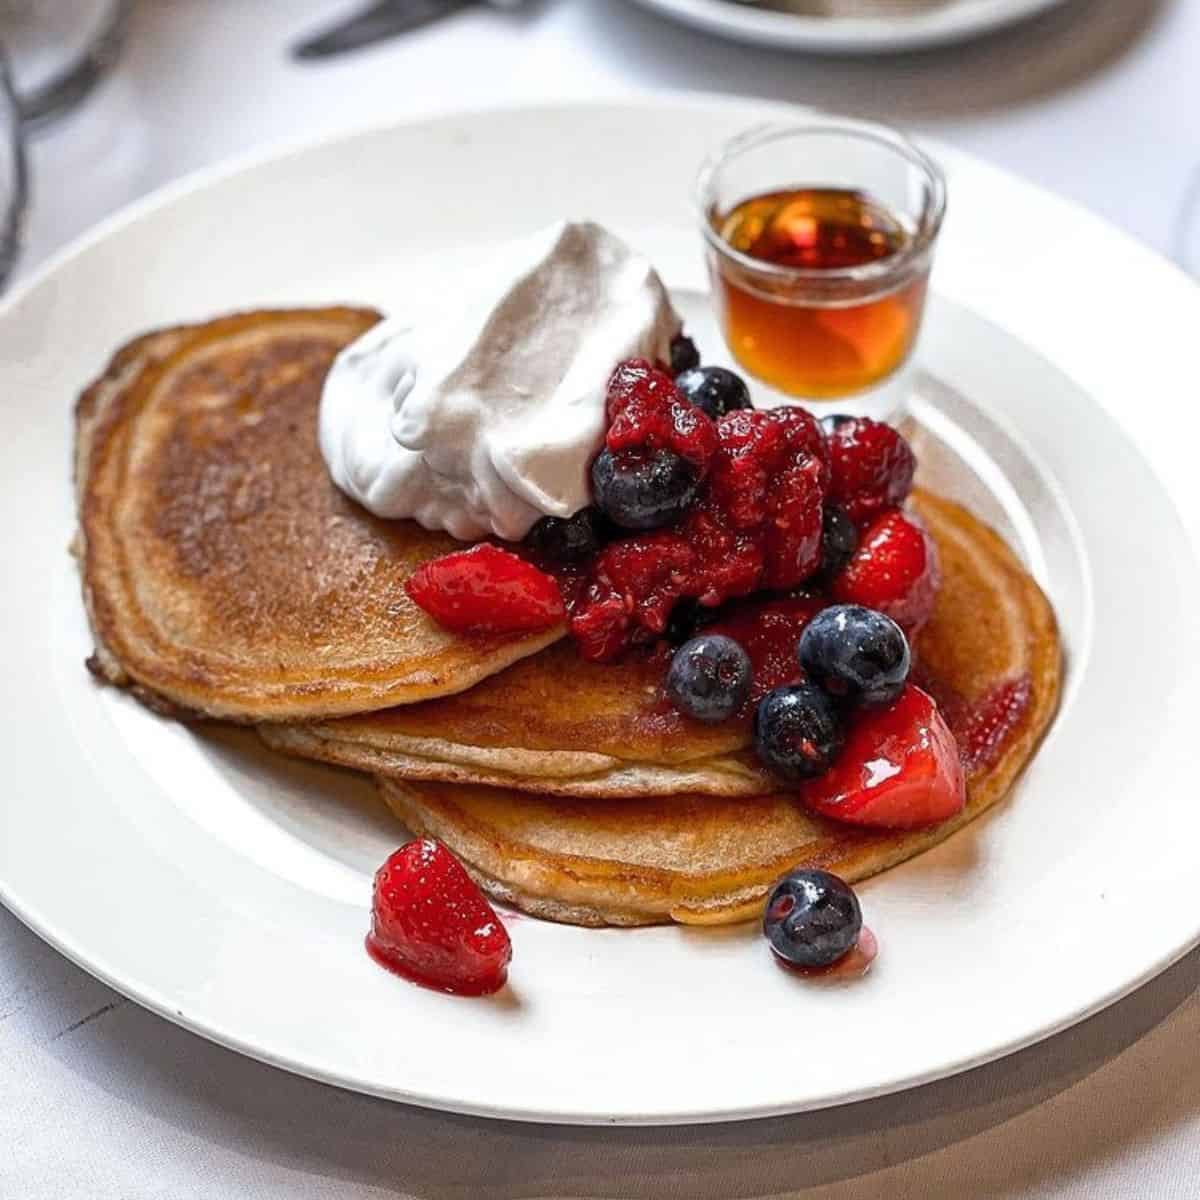 pancakes with warm buttermilk and berries Christopher Grill